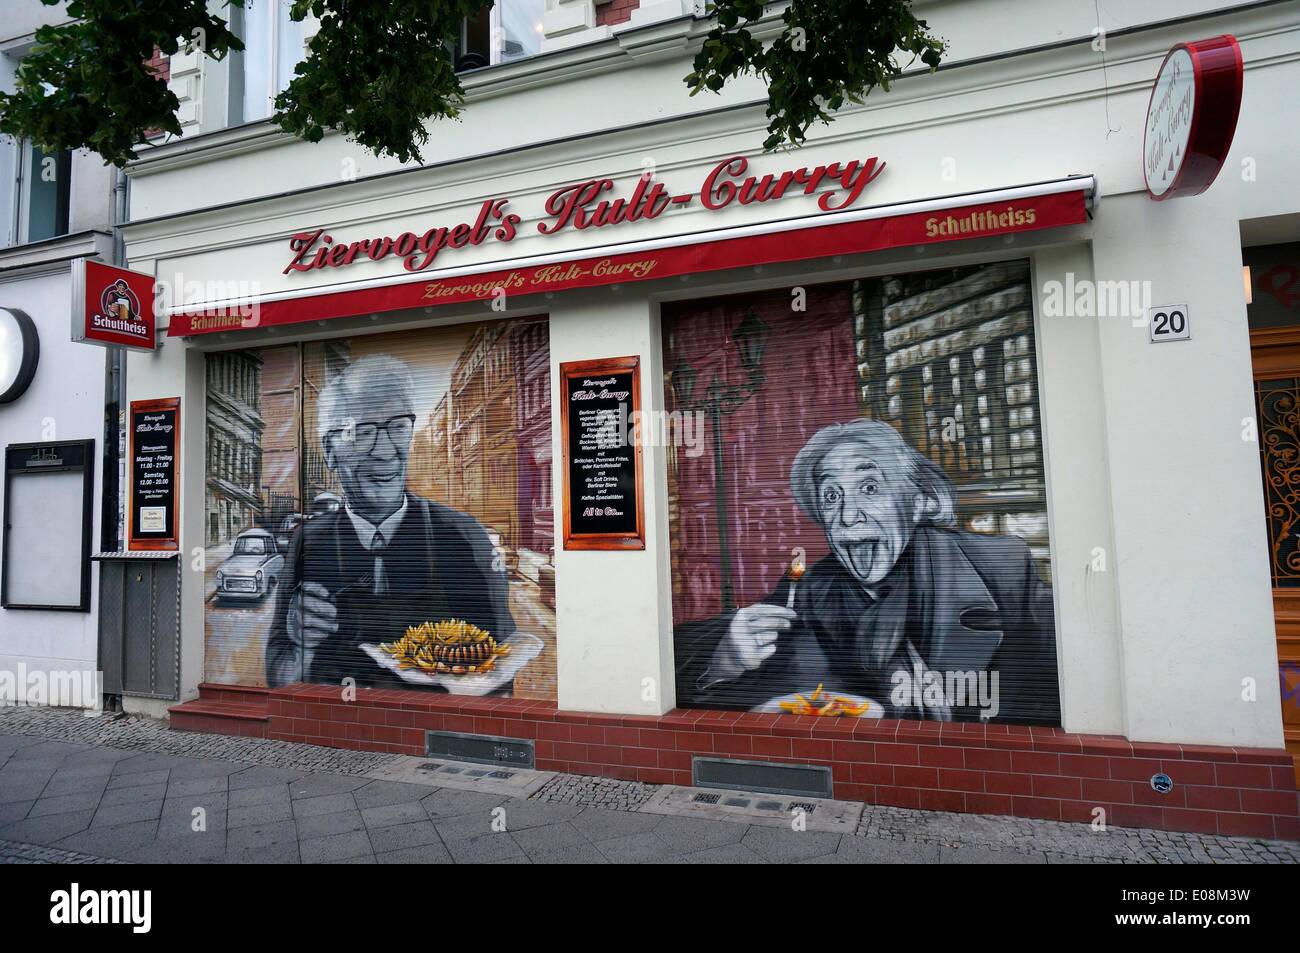 Berlin, Germany. 04th Aug, 2013. The portraits of Erich Honecker and Albert Einstein are painted onto the shutters of the fast food restaurant 'Ziervogel's Kult-Curry' in Berlin, Germany, 04 August 2013. Photo: Berliner Verlag/S. Steinach NO WIRE/dpa/Alamy Live News Stock Photo